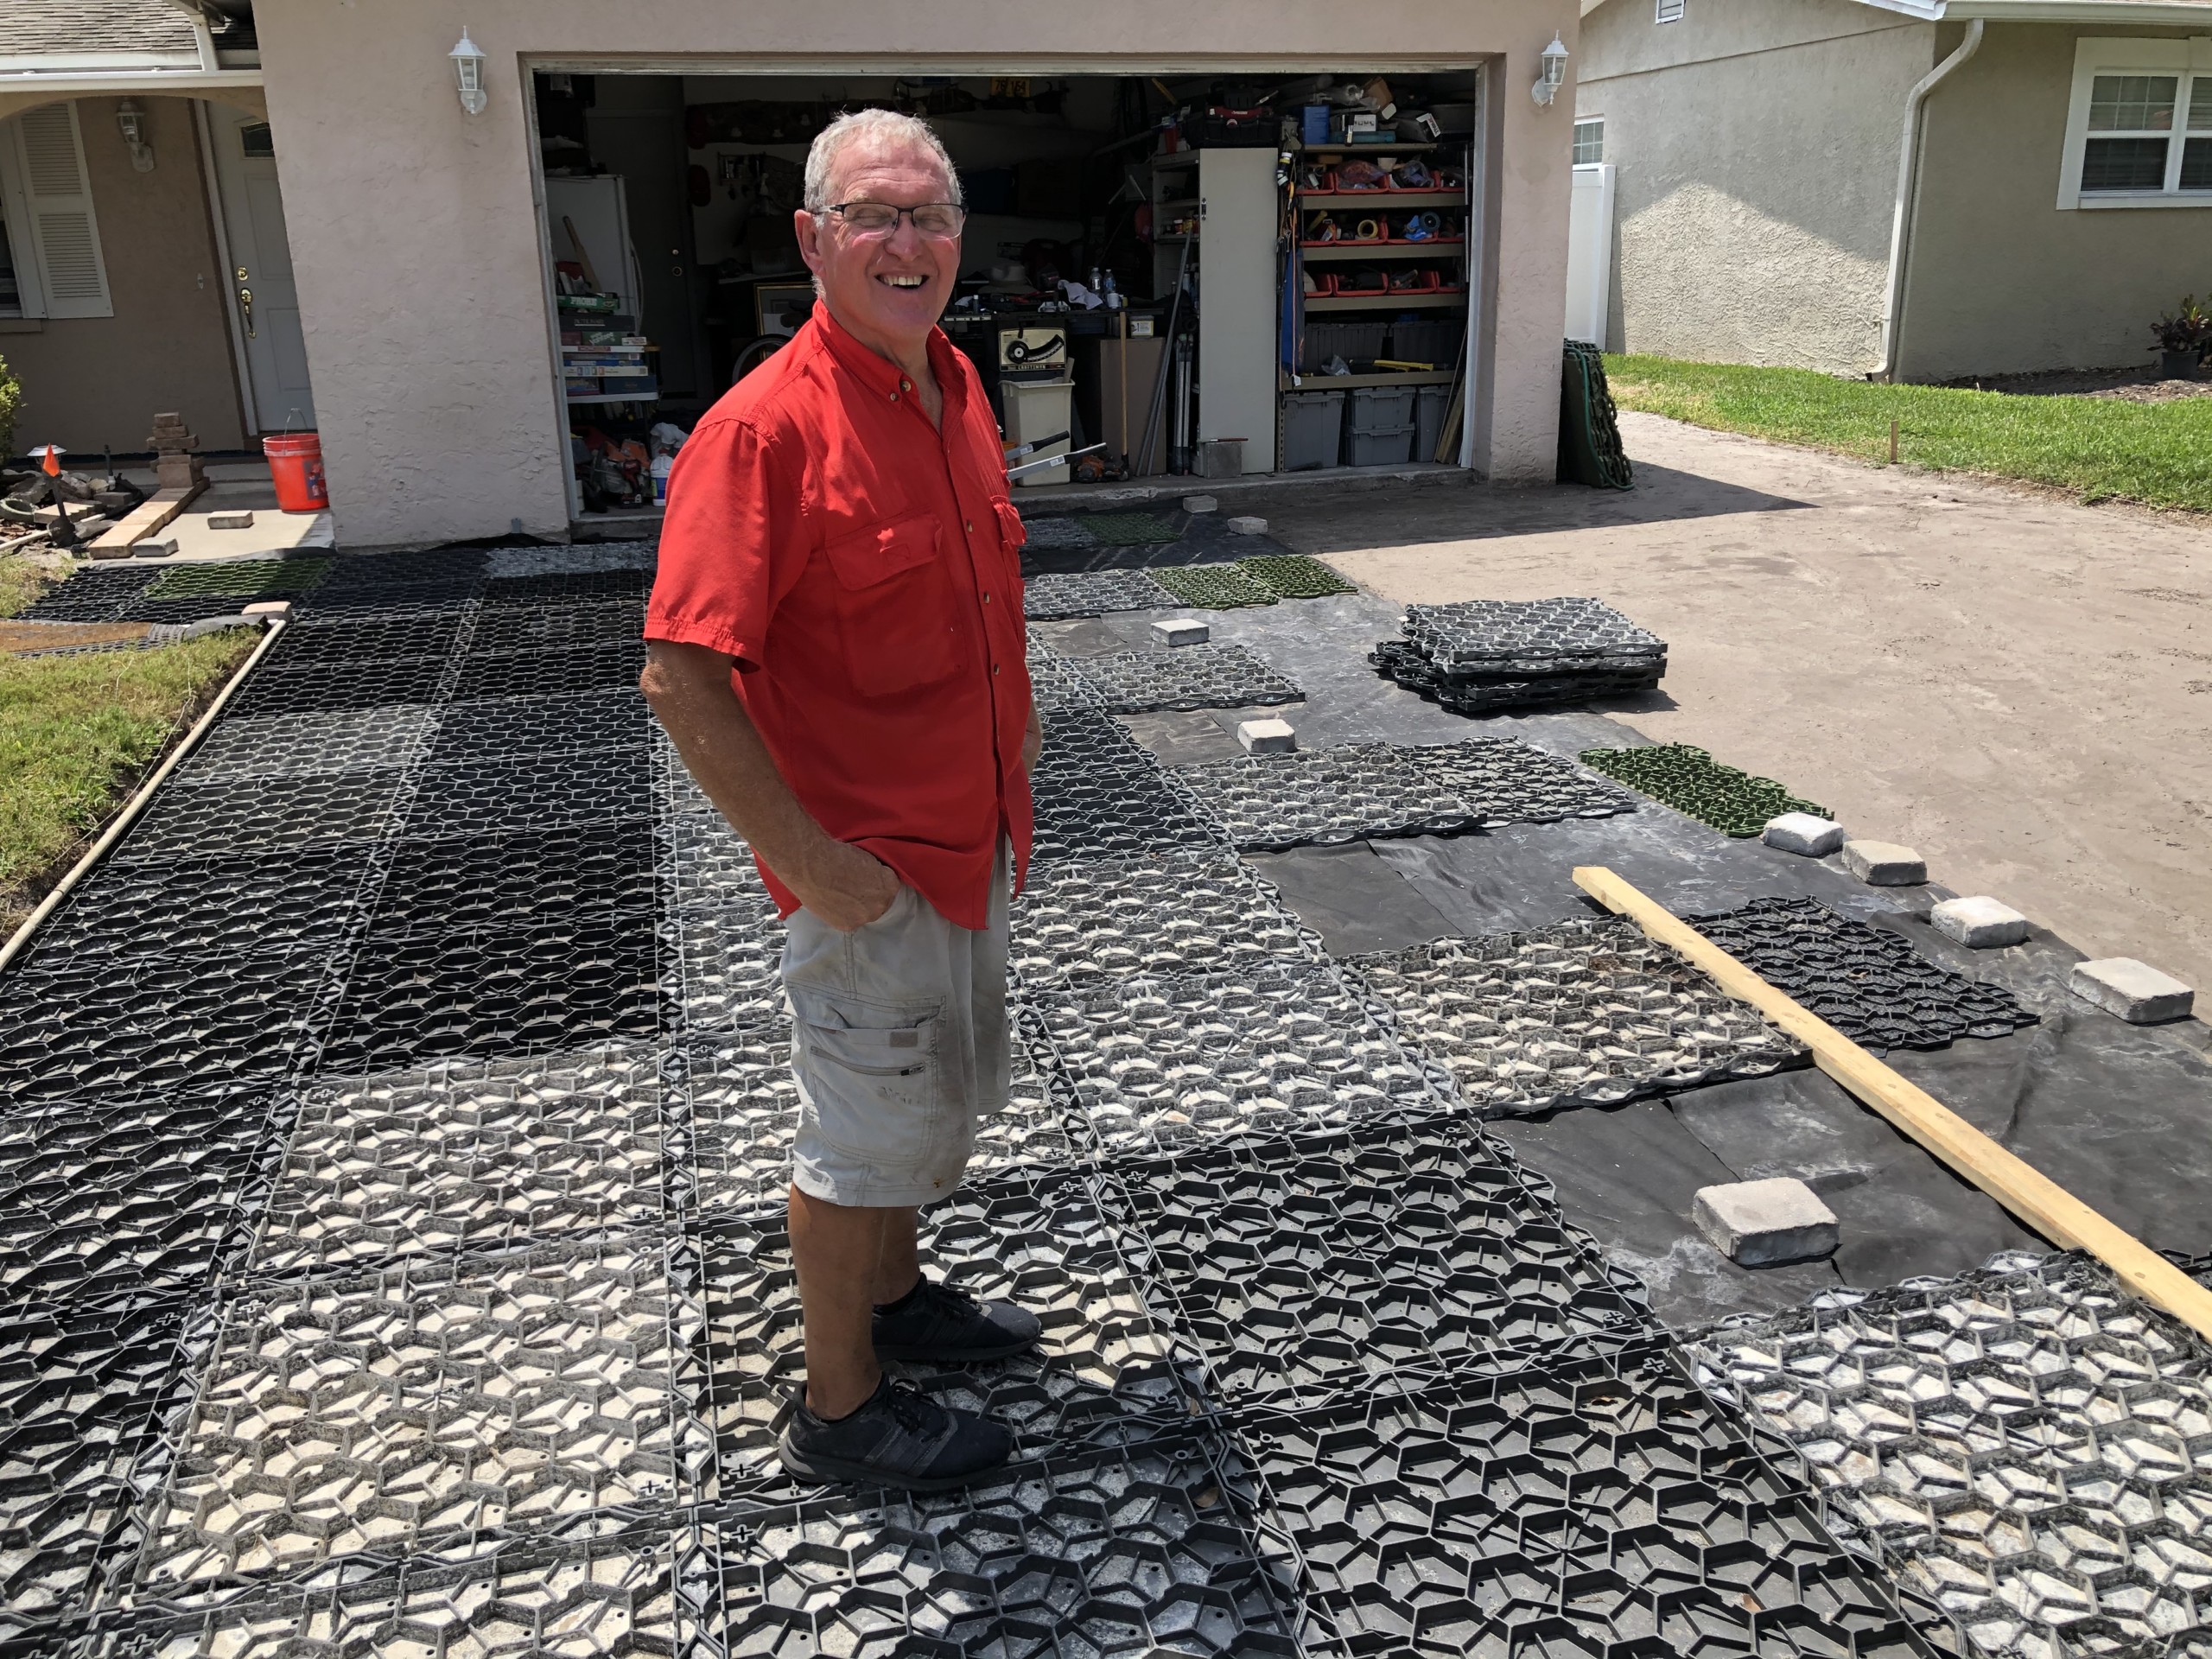 How To Lay Pavers Over Dirt The Best, Can You Put Patio Pavers On Dirt